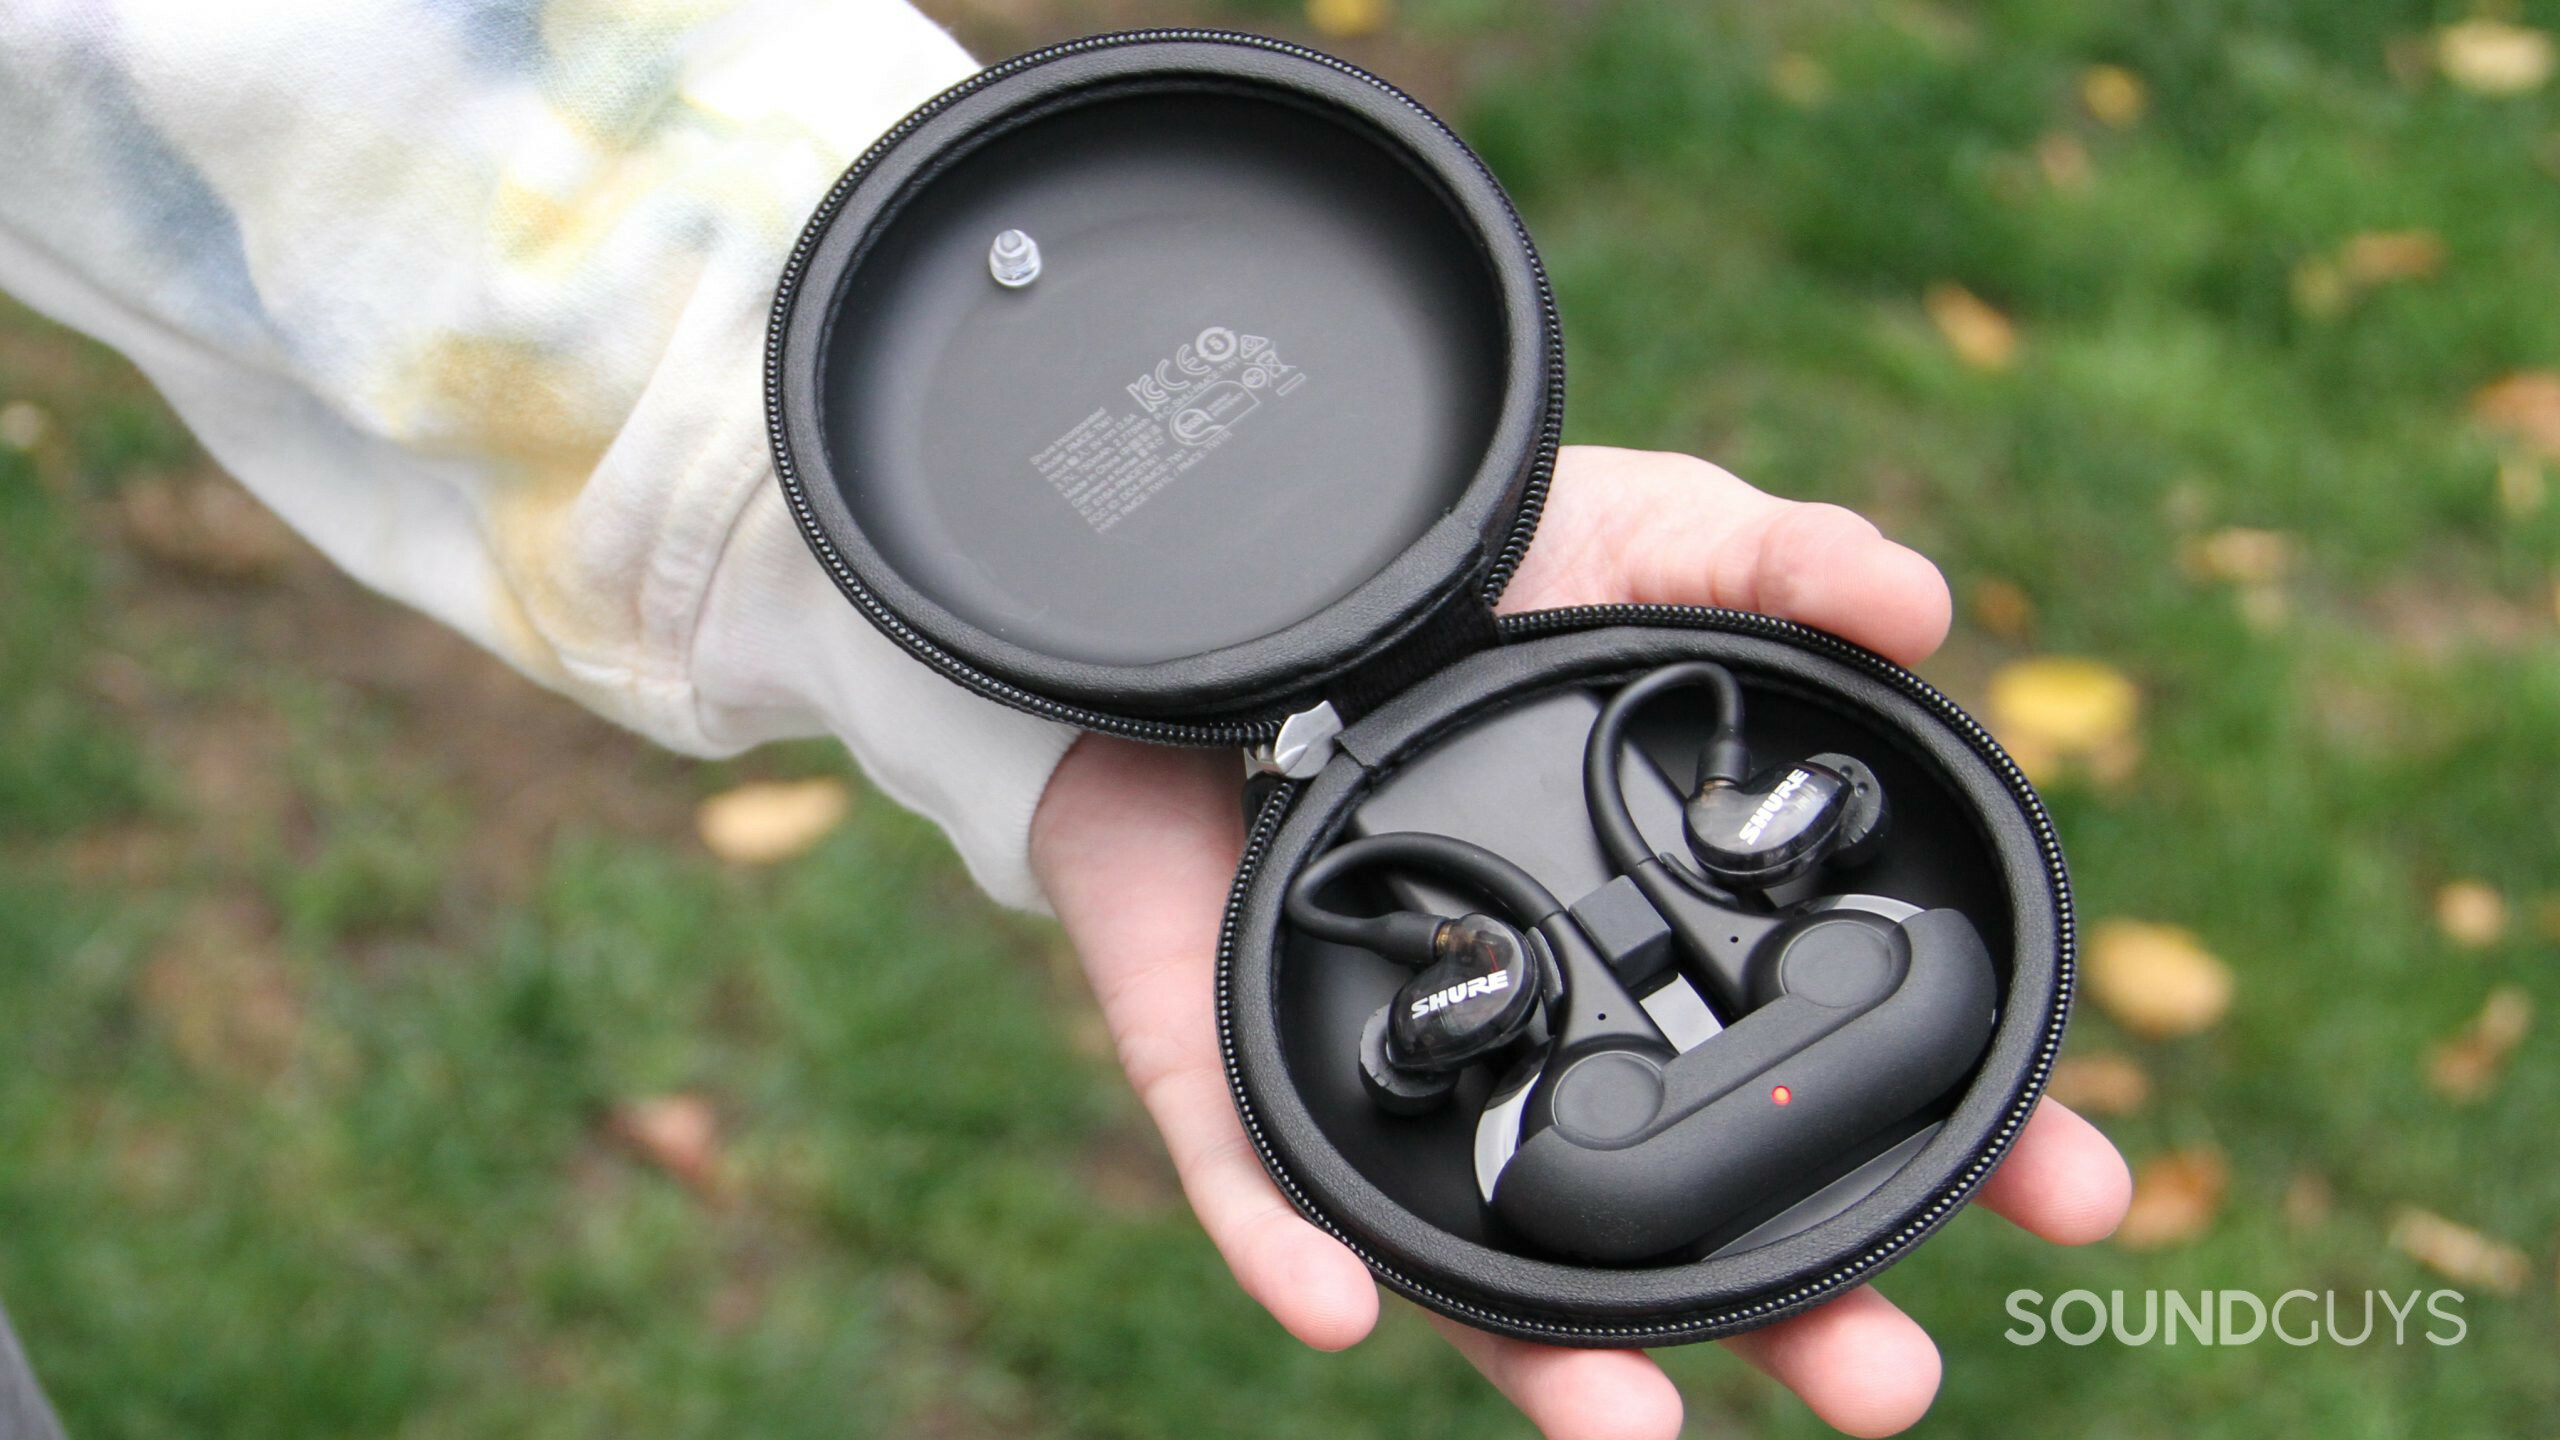 A hand holds the open battery case with the Shure AONIC 215 Gen 2 earphones inside.